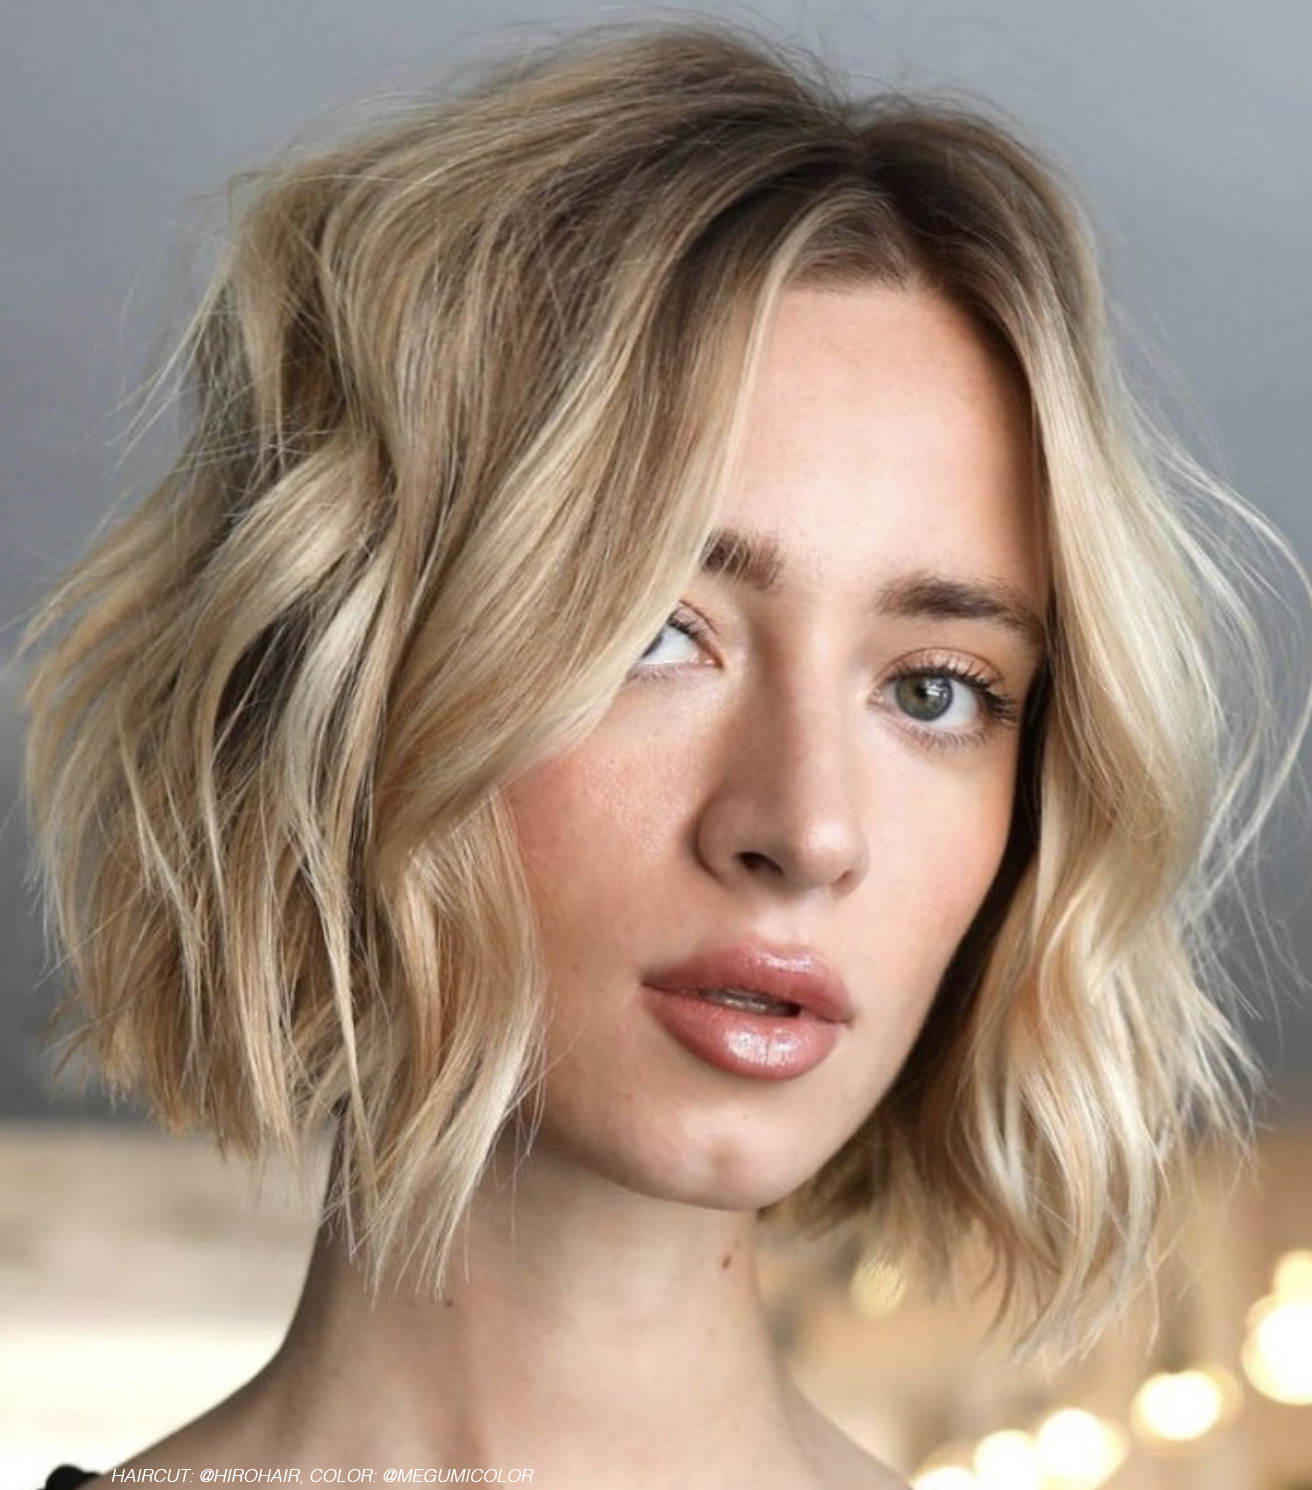 THE BEST BOB HAIRSTYLE FOR YOUR FACE SHAPE - Revlon Professional